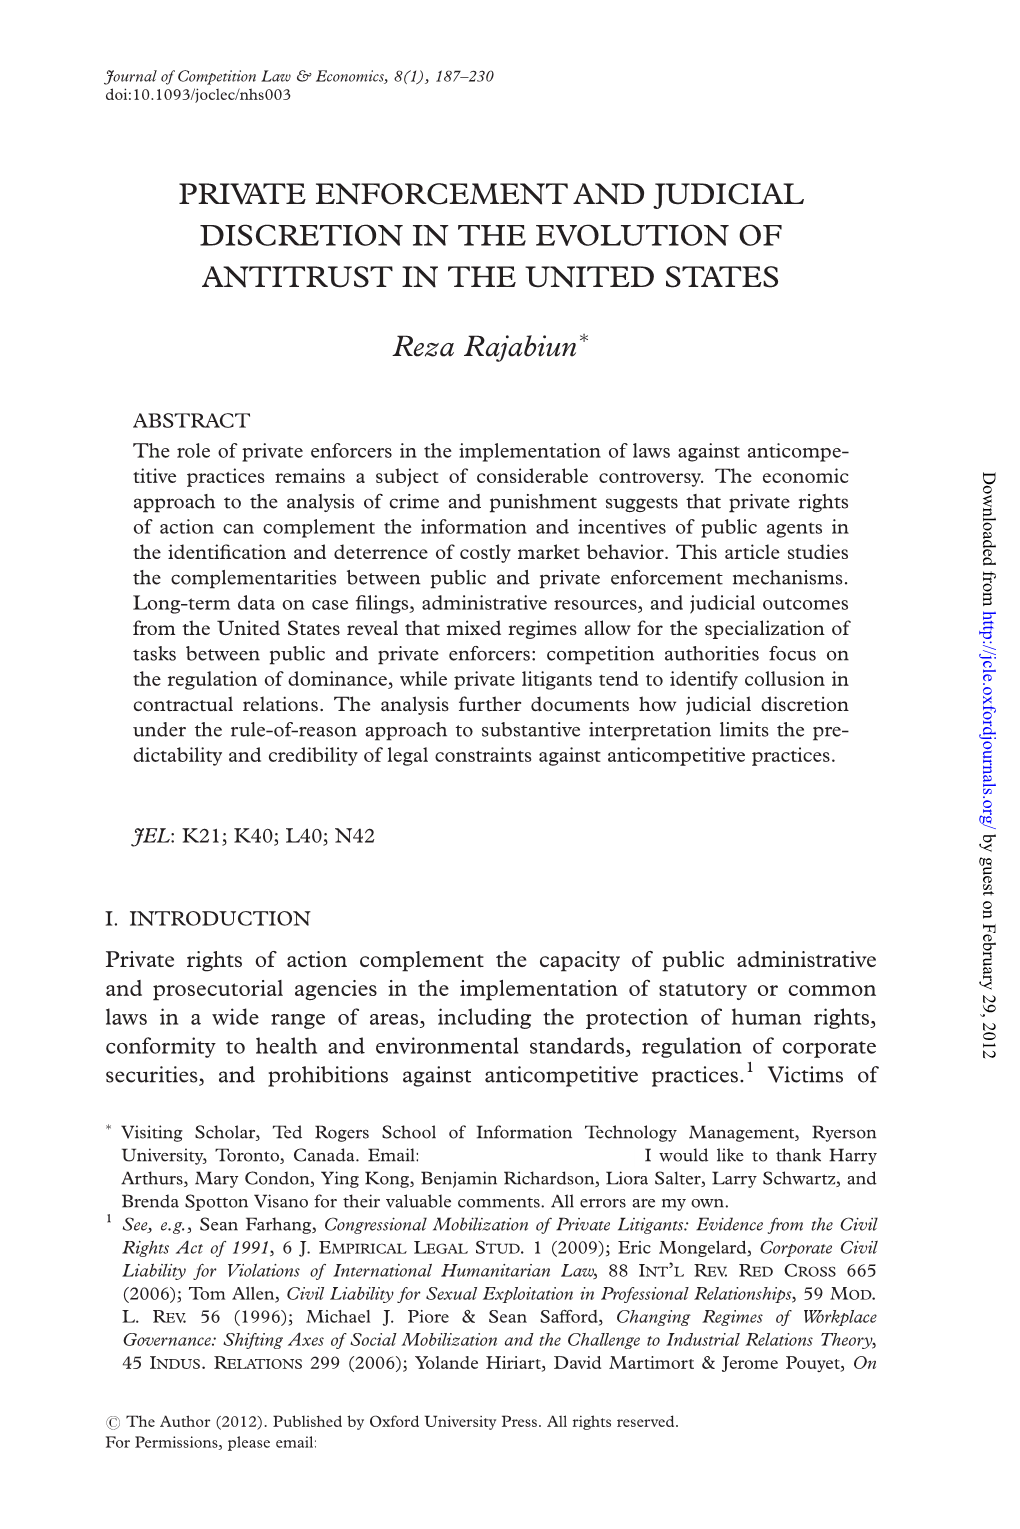 Private Enforcement and Judicial Discretion in the Evolution of Antitrust in the United States